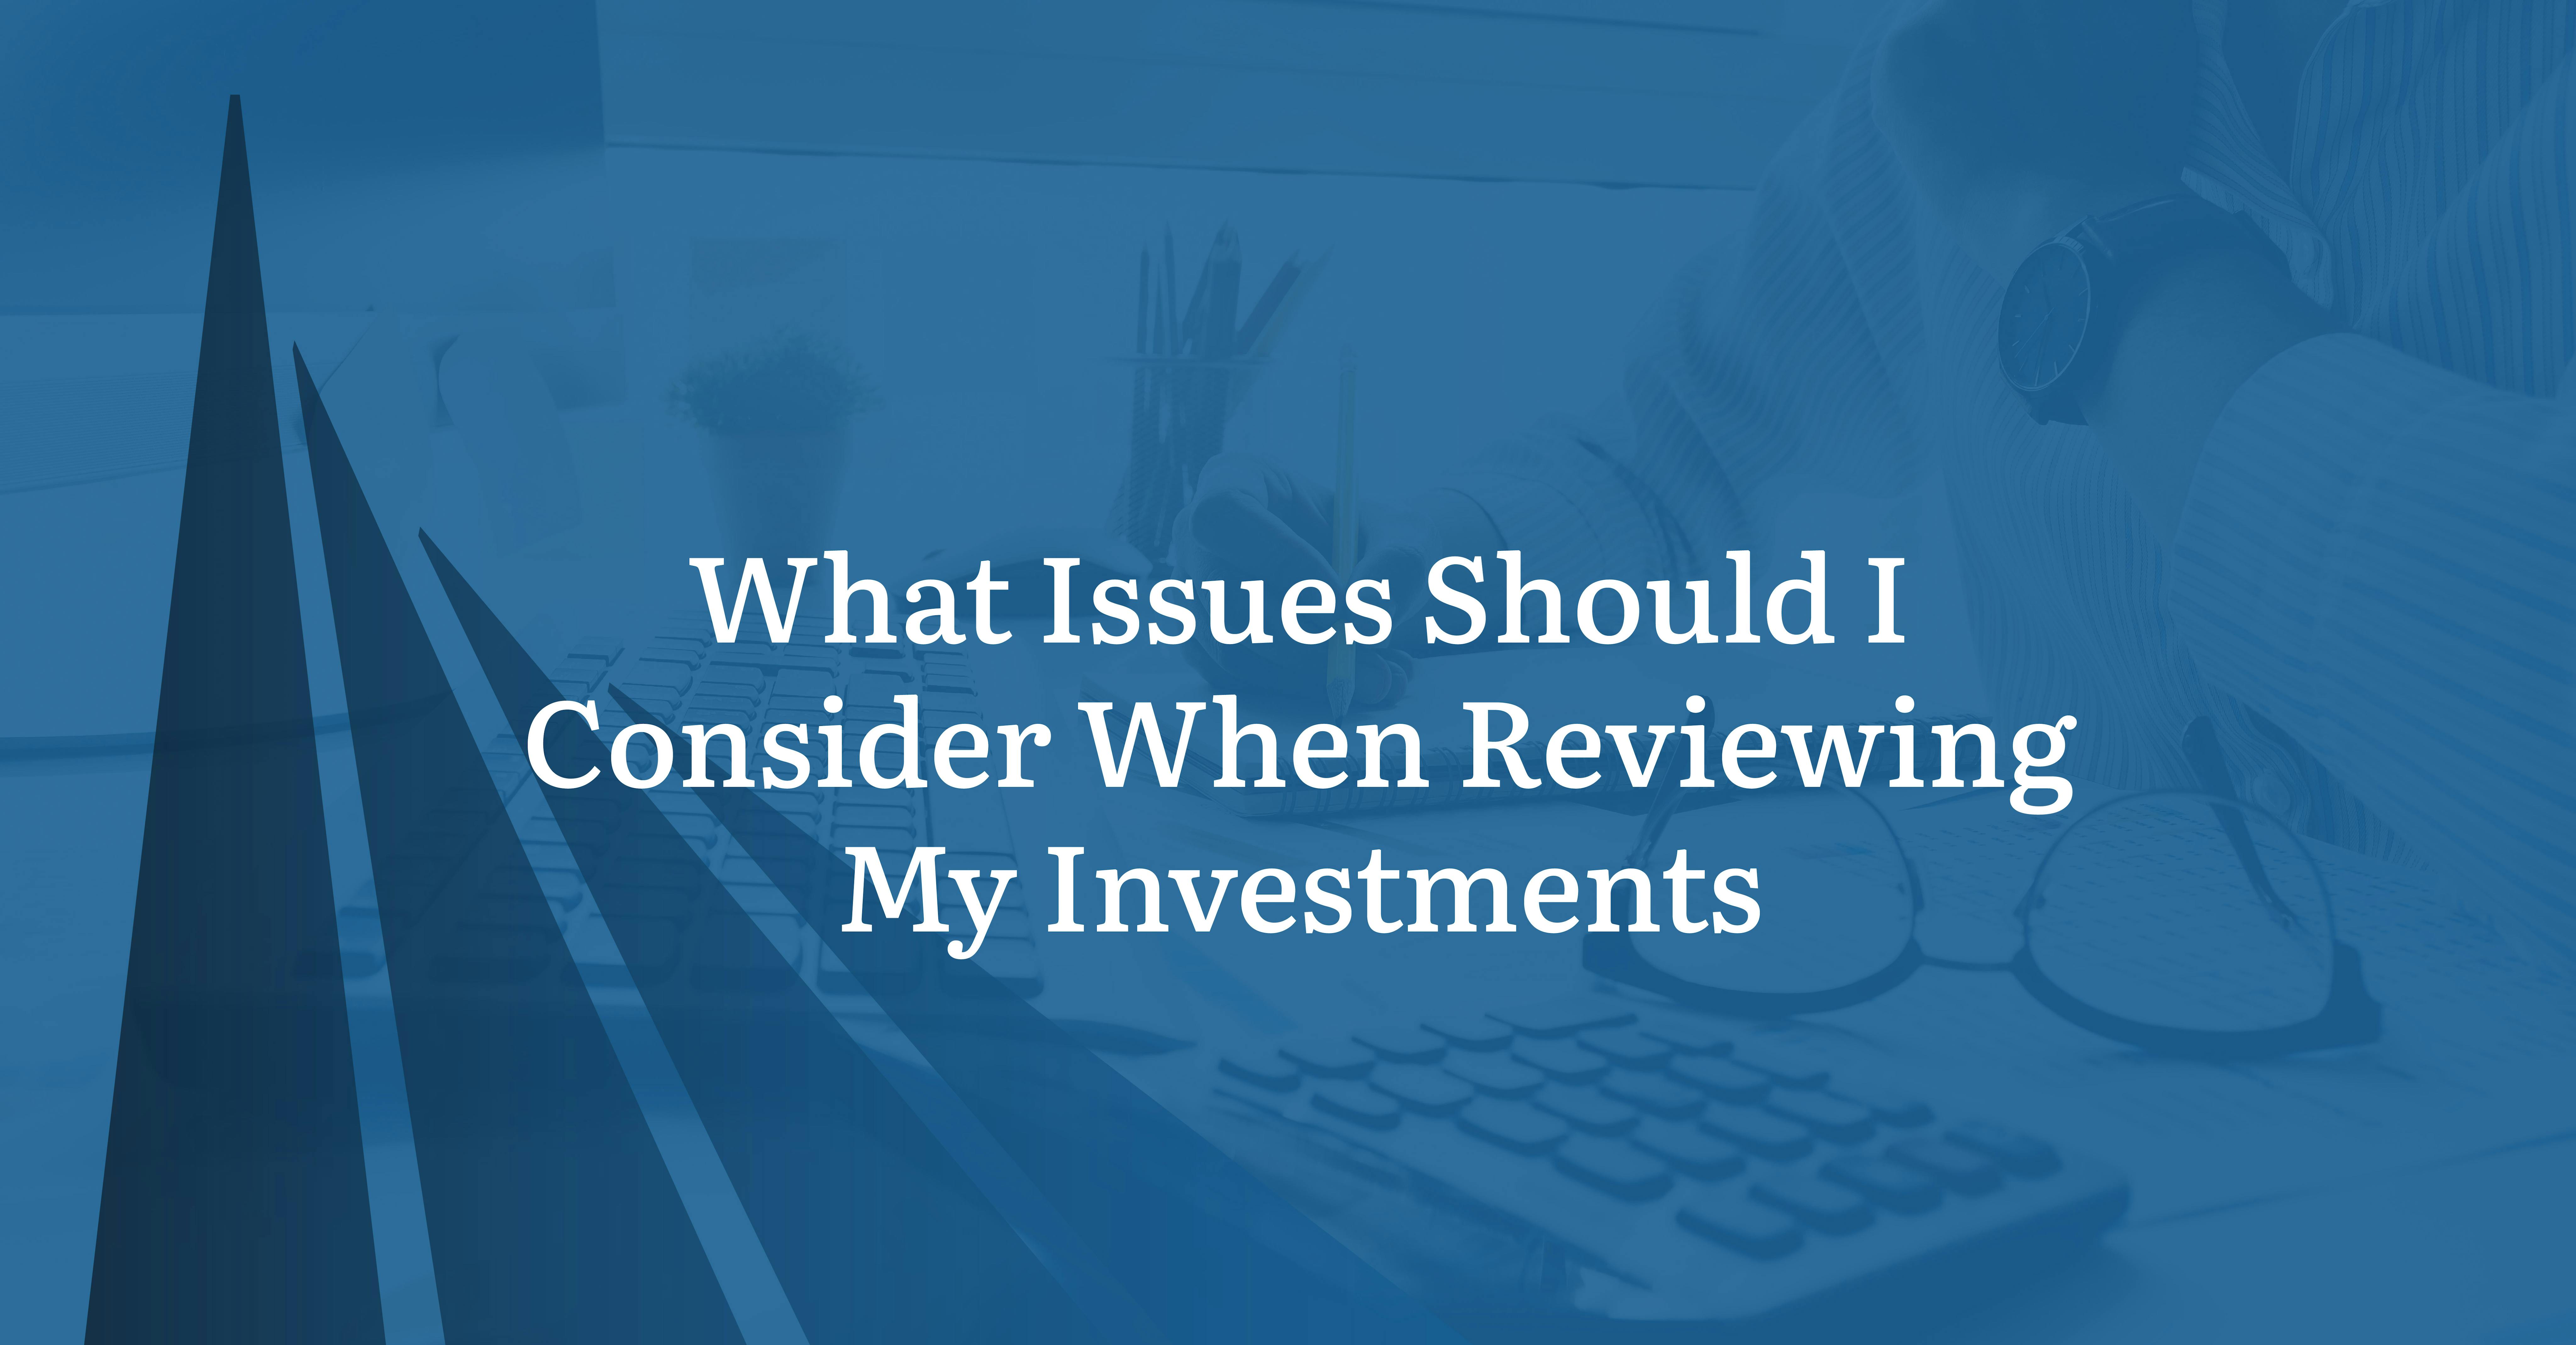 What Issues Should I Consider When Reviewing My Investments